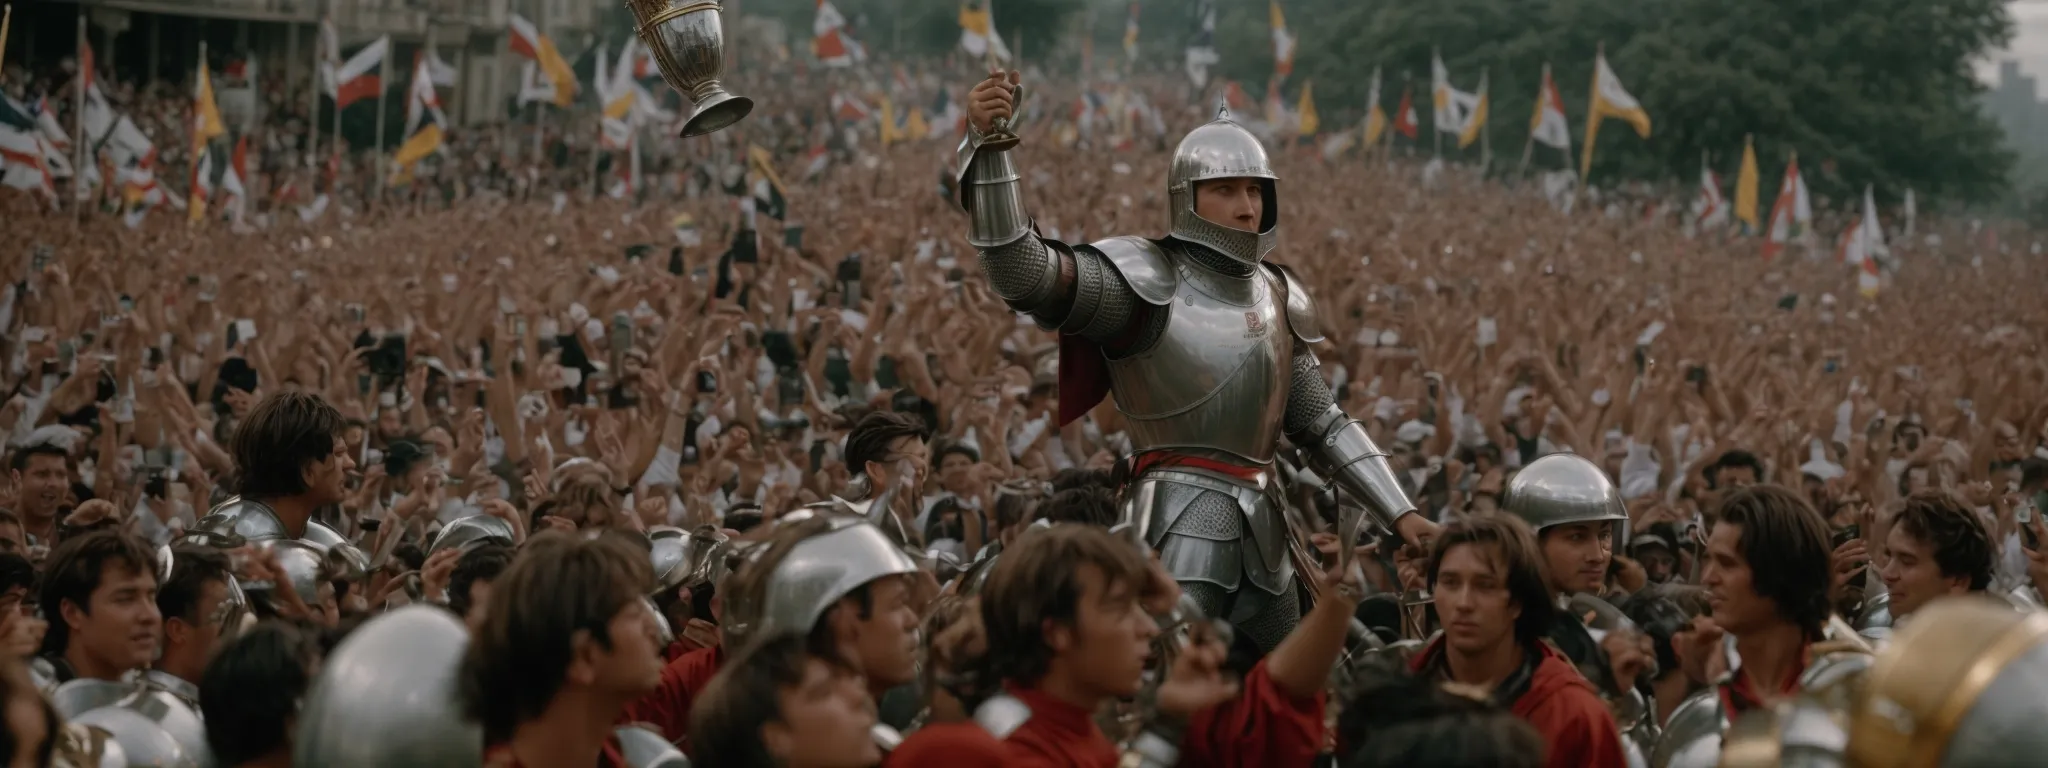 a knight in shining armor emerging victorious holding aloft a golden trophy amidst a cheering crowd.